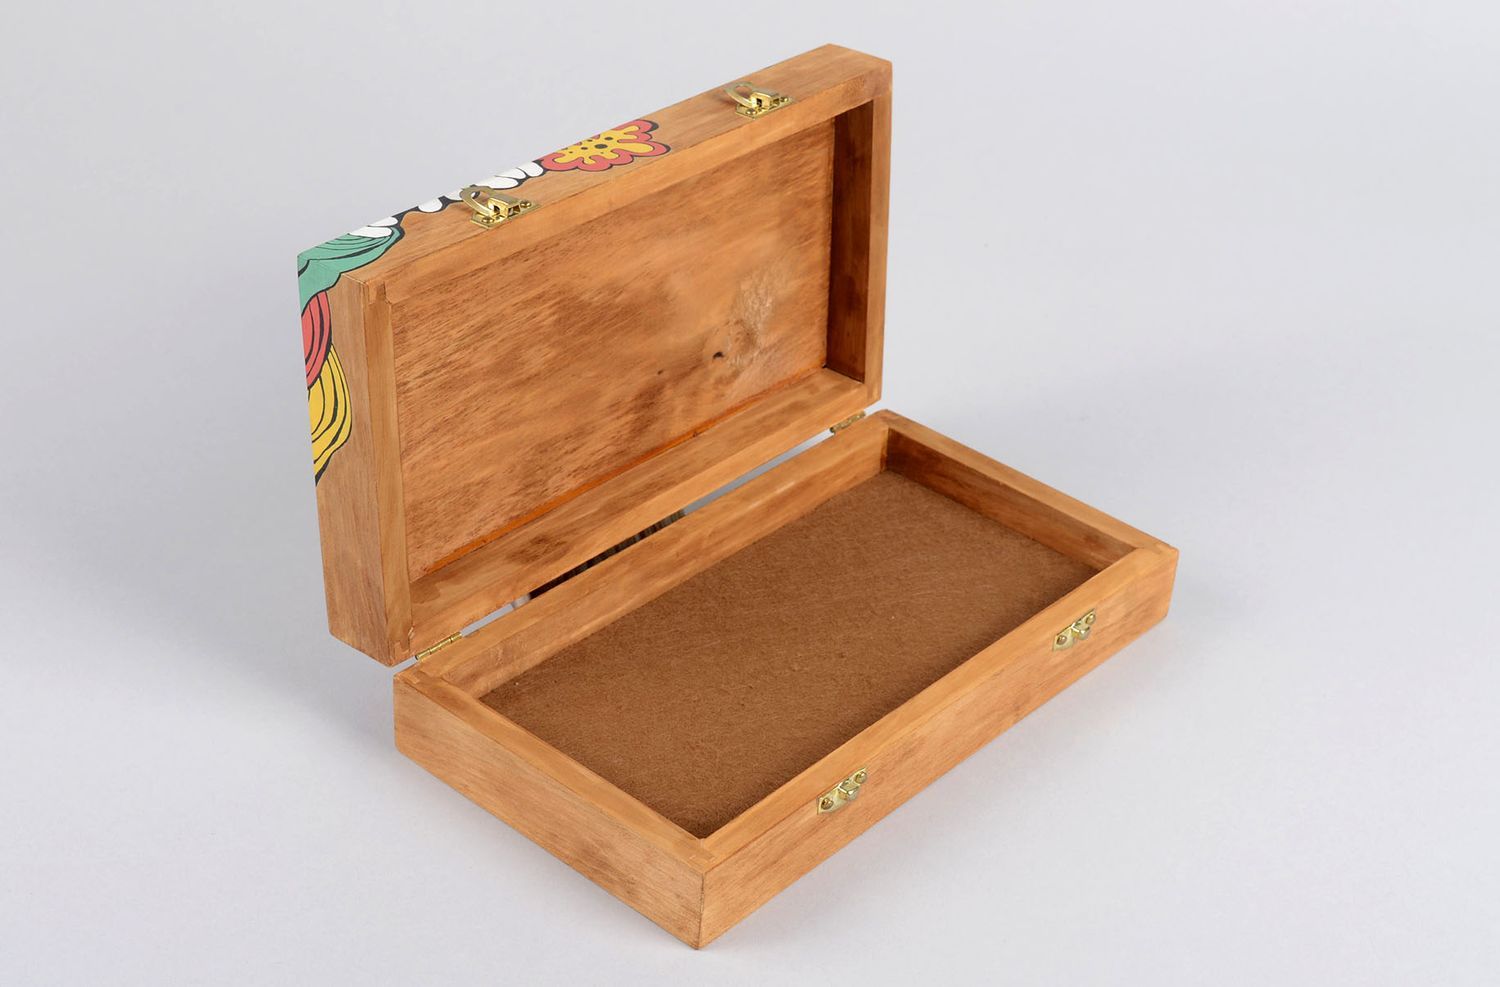 Handmade wooden box jewelry box design modern living room gifts for her photo 2